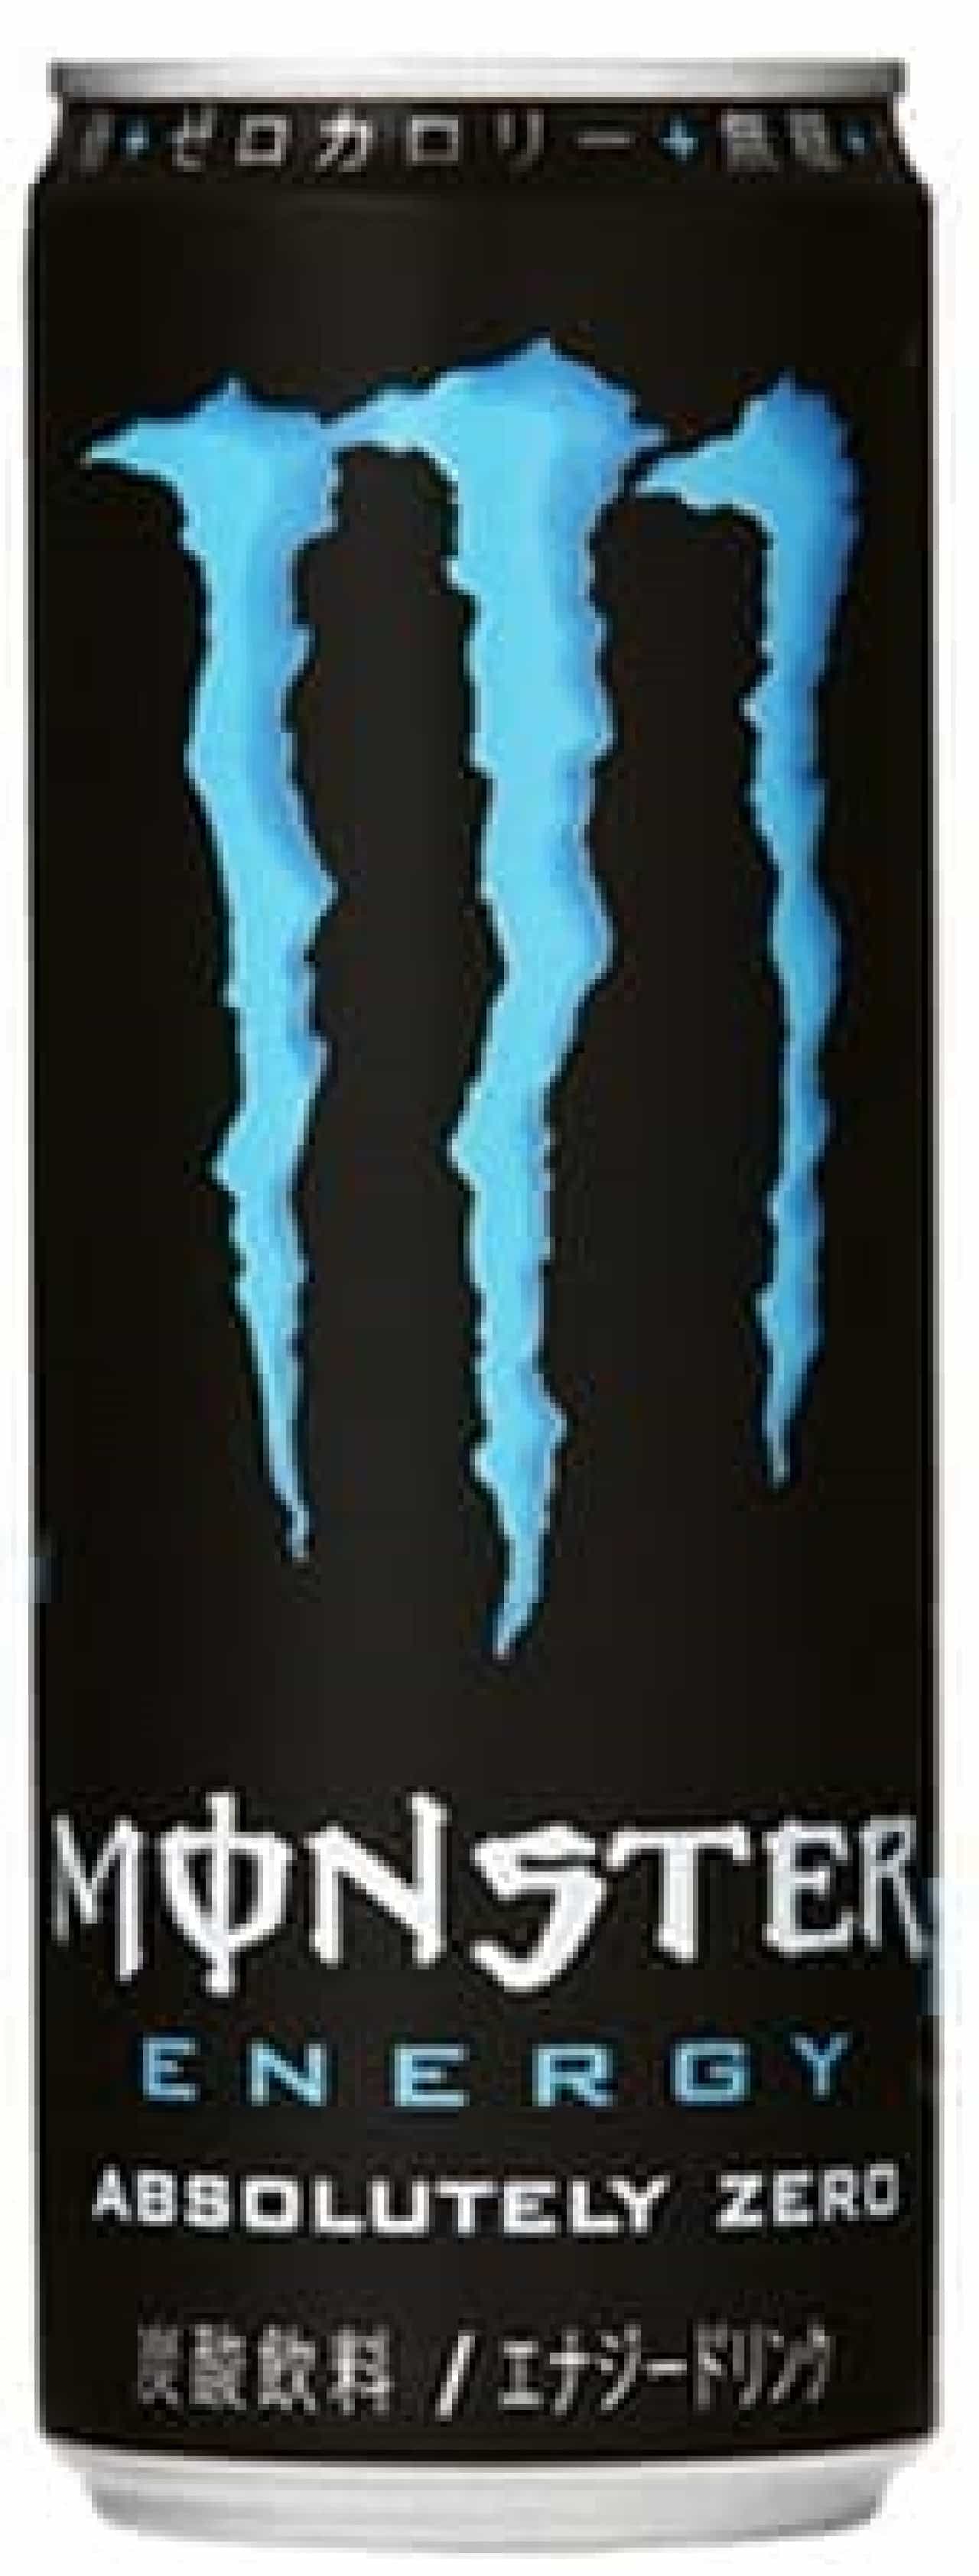 Launched "Monster Energy" with zero calories